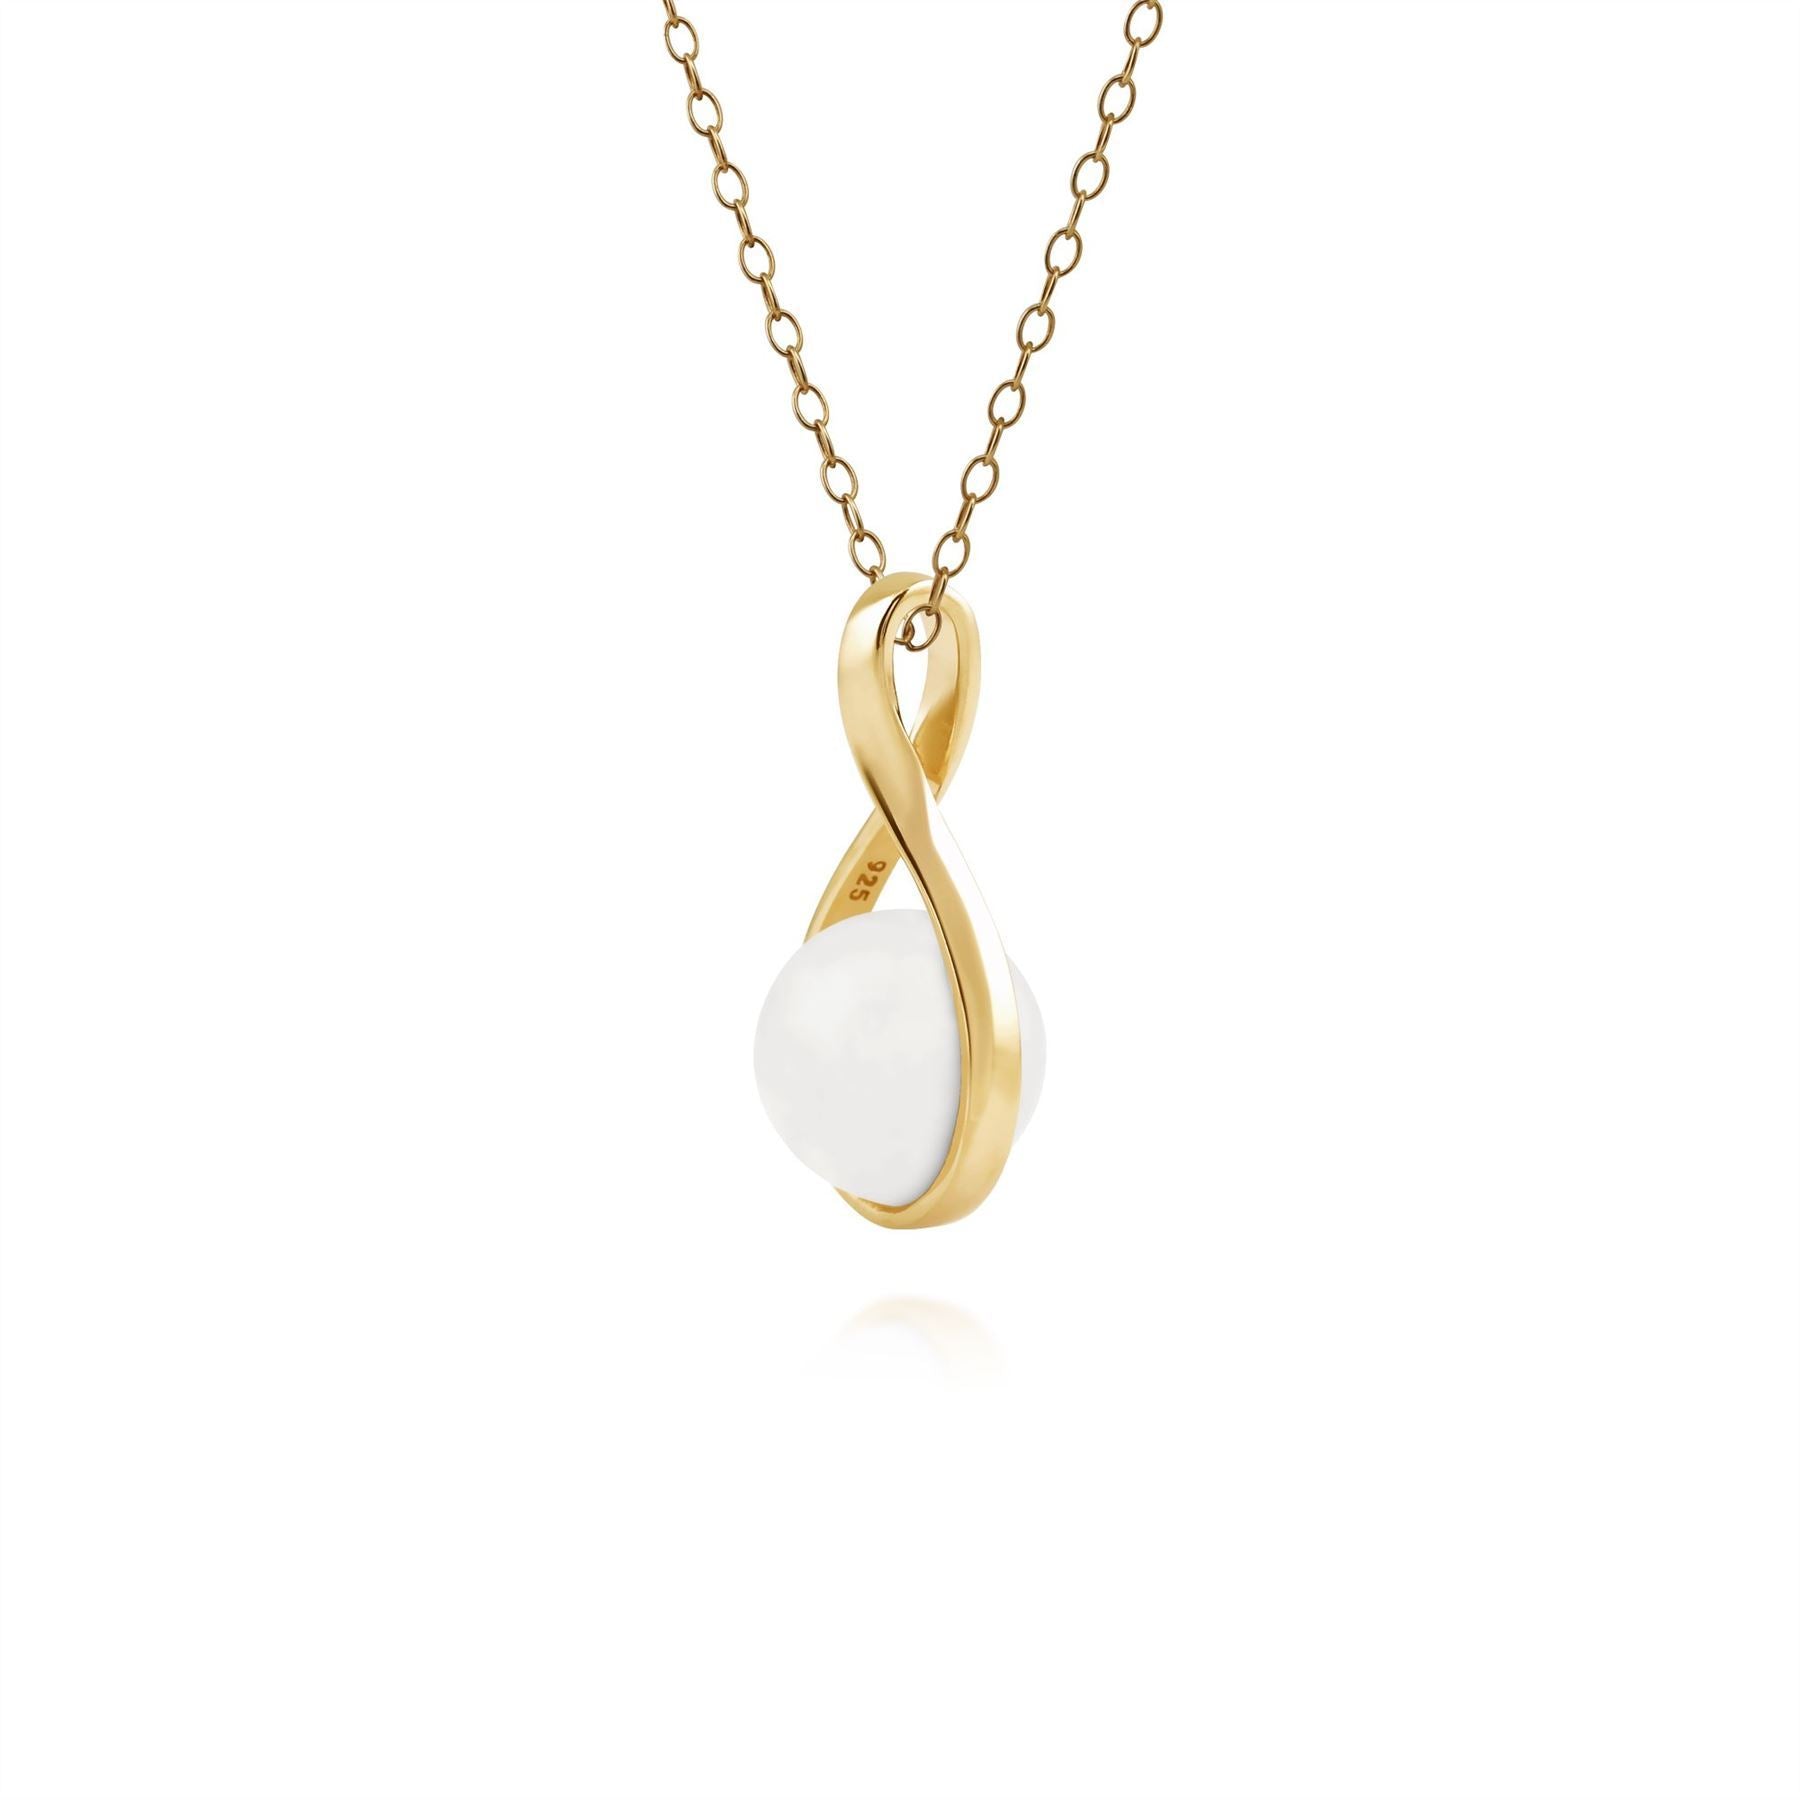 Kosmos Agate Orb Pendant in Yellow Gold Plated Sterling Silver